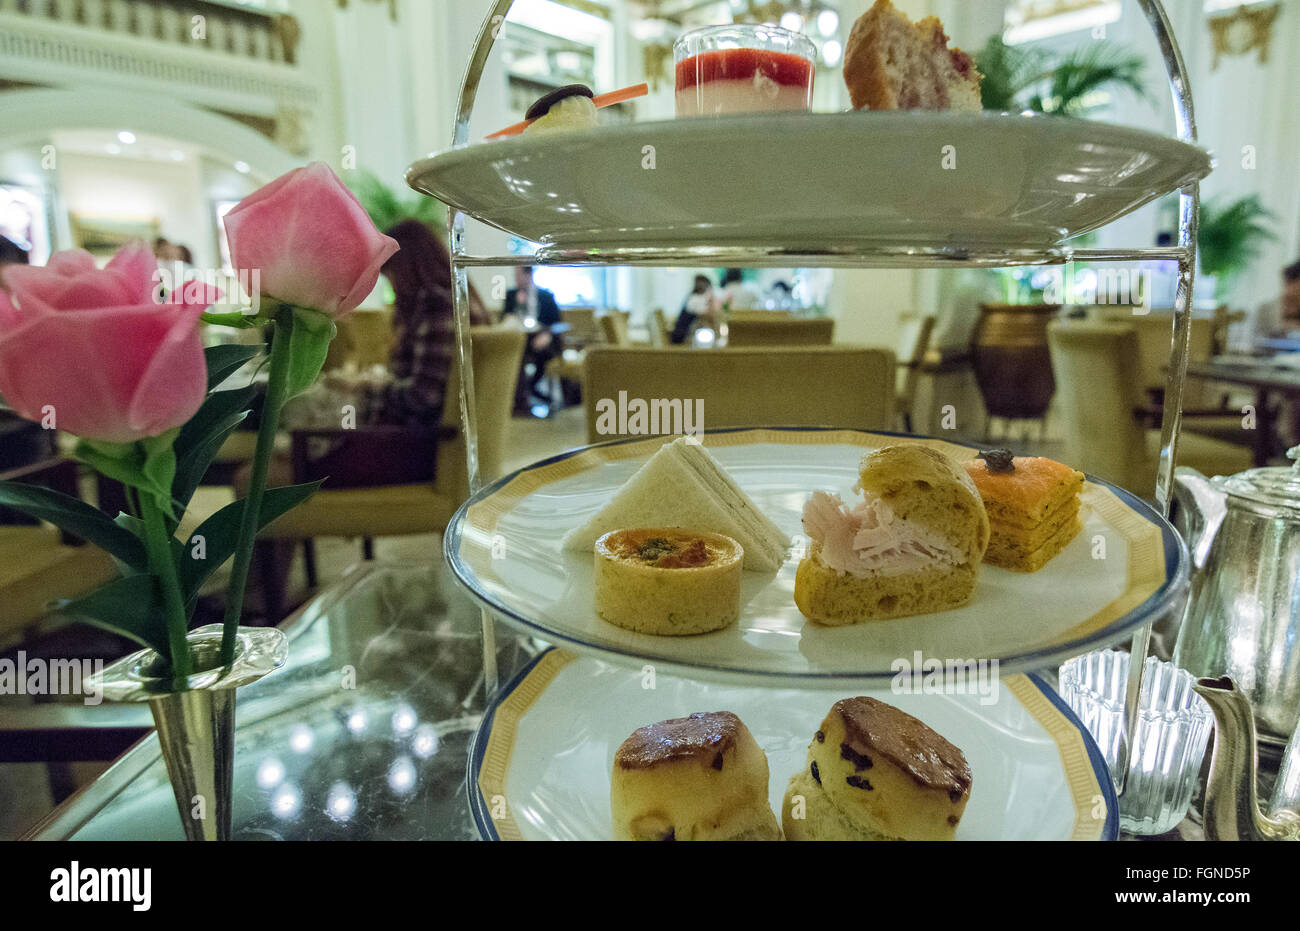 Hong Kong China Peninsula Hotel lobby excclusive High Tea with tea Afternoon Tea of cakes and finger sandwichs at table Stock Photo